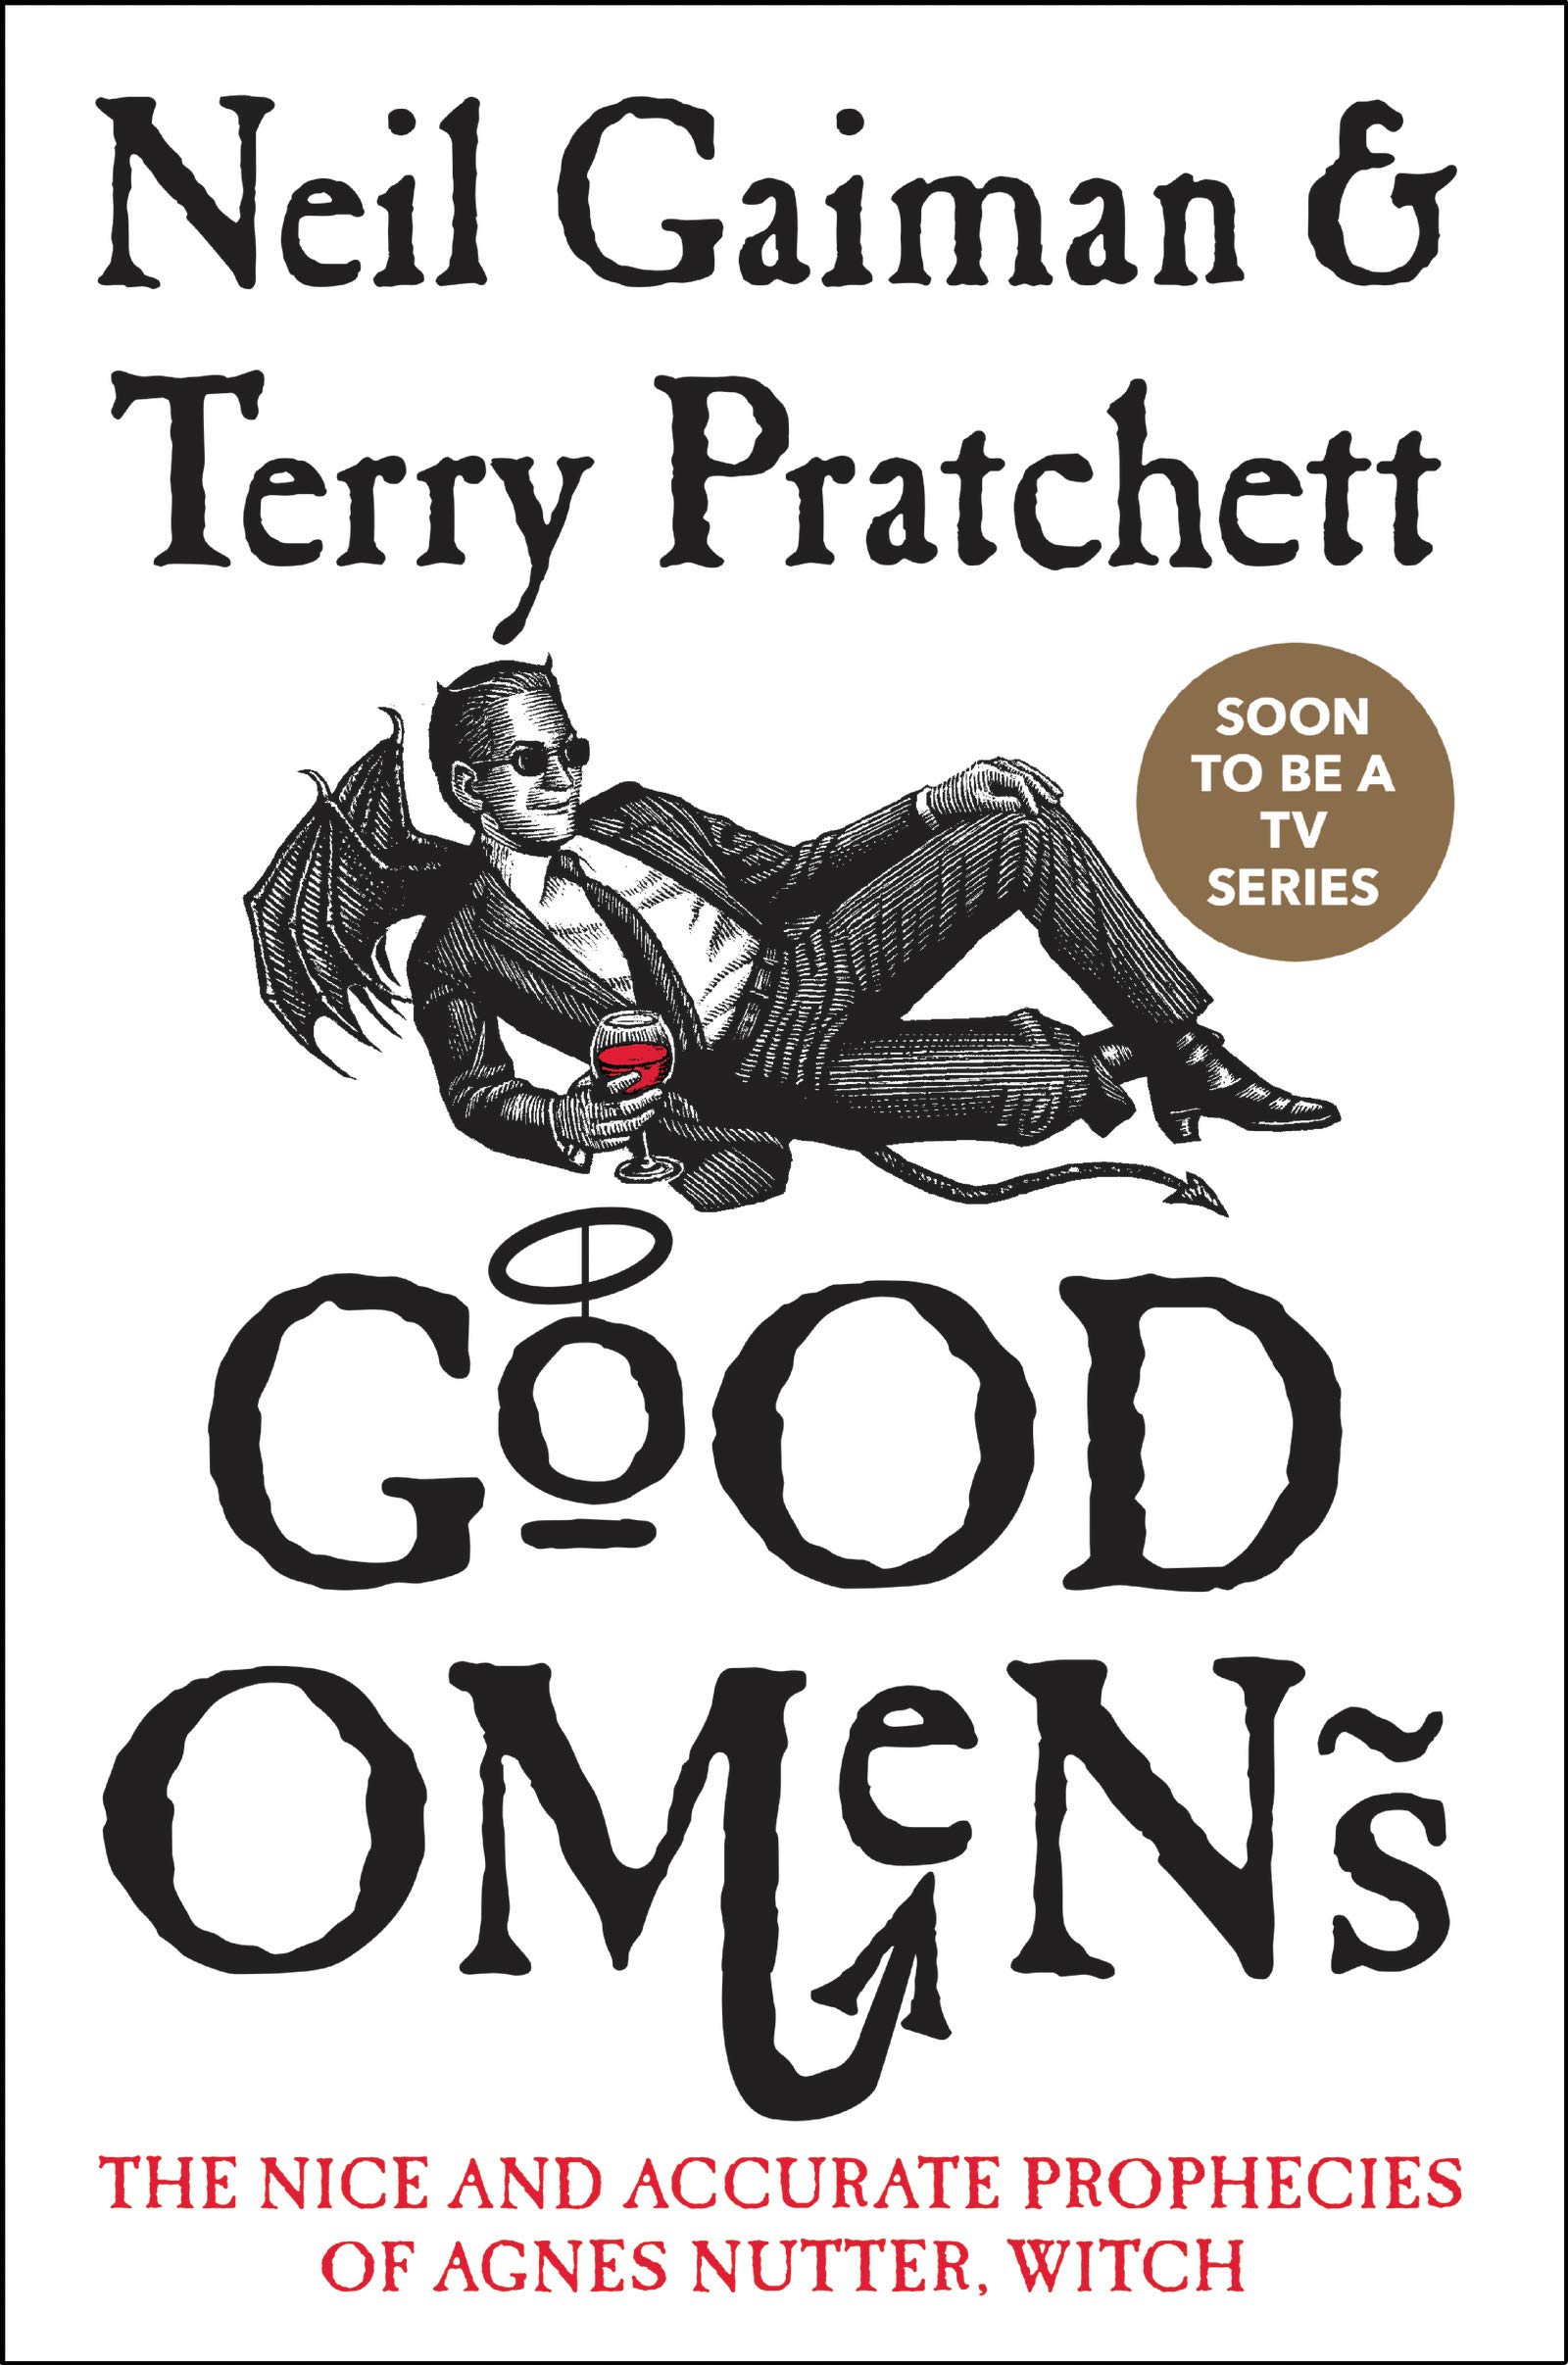 Read 'good omens' by neil gaiman and terry pratchett—the witty tale of an angel and demon teaming up to prevent the apocalypse, now being adapted into a television series.